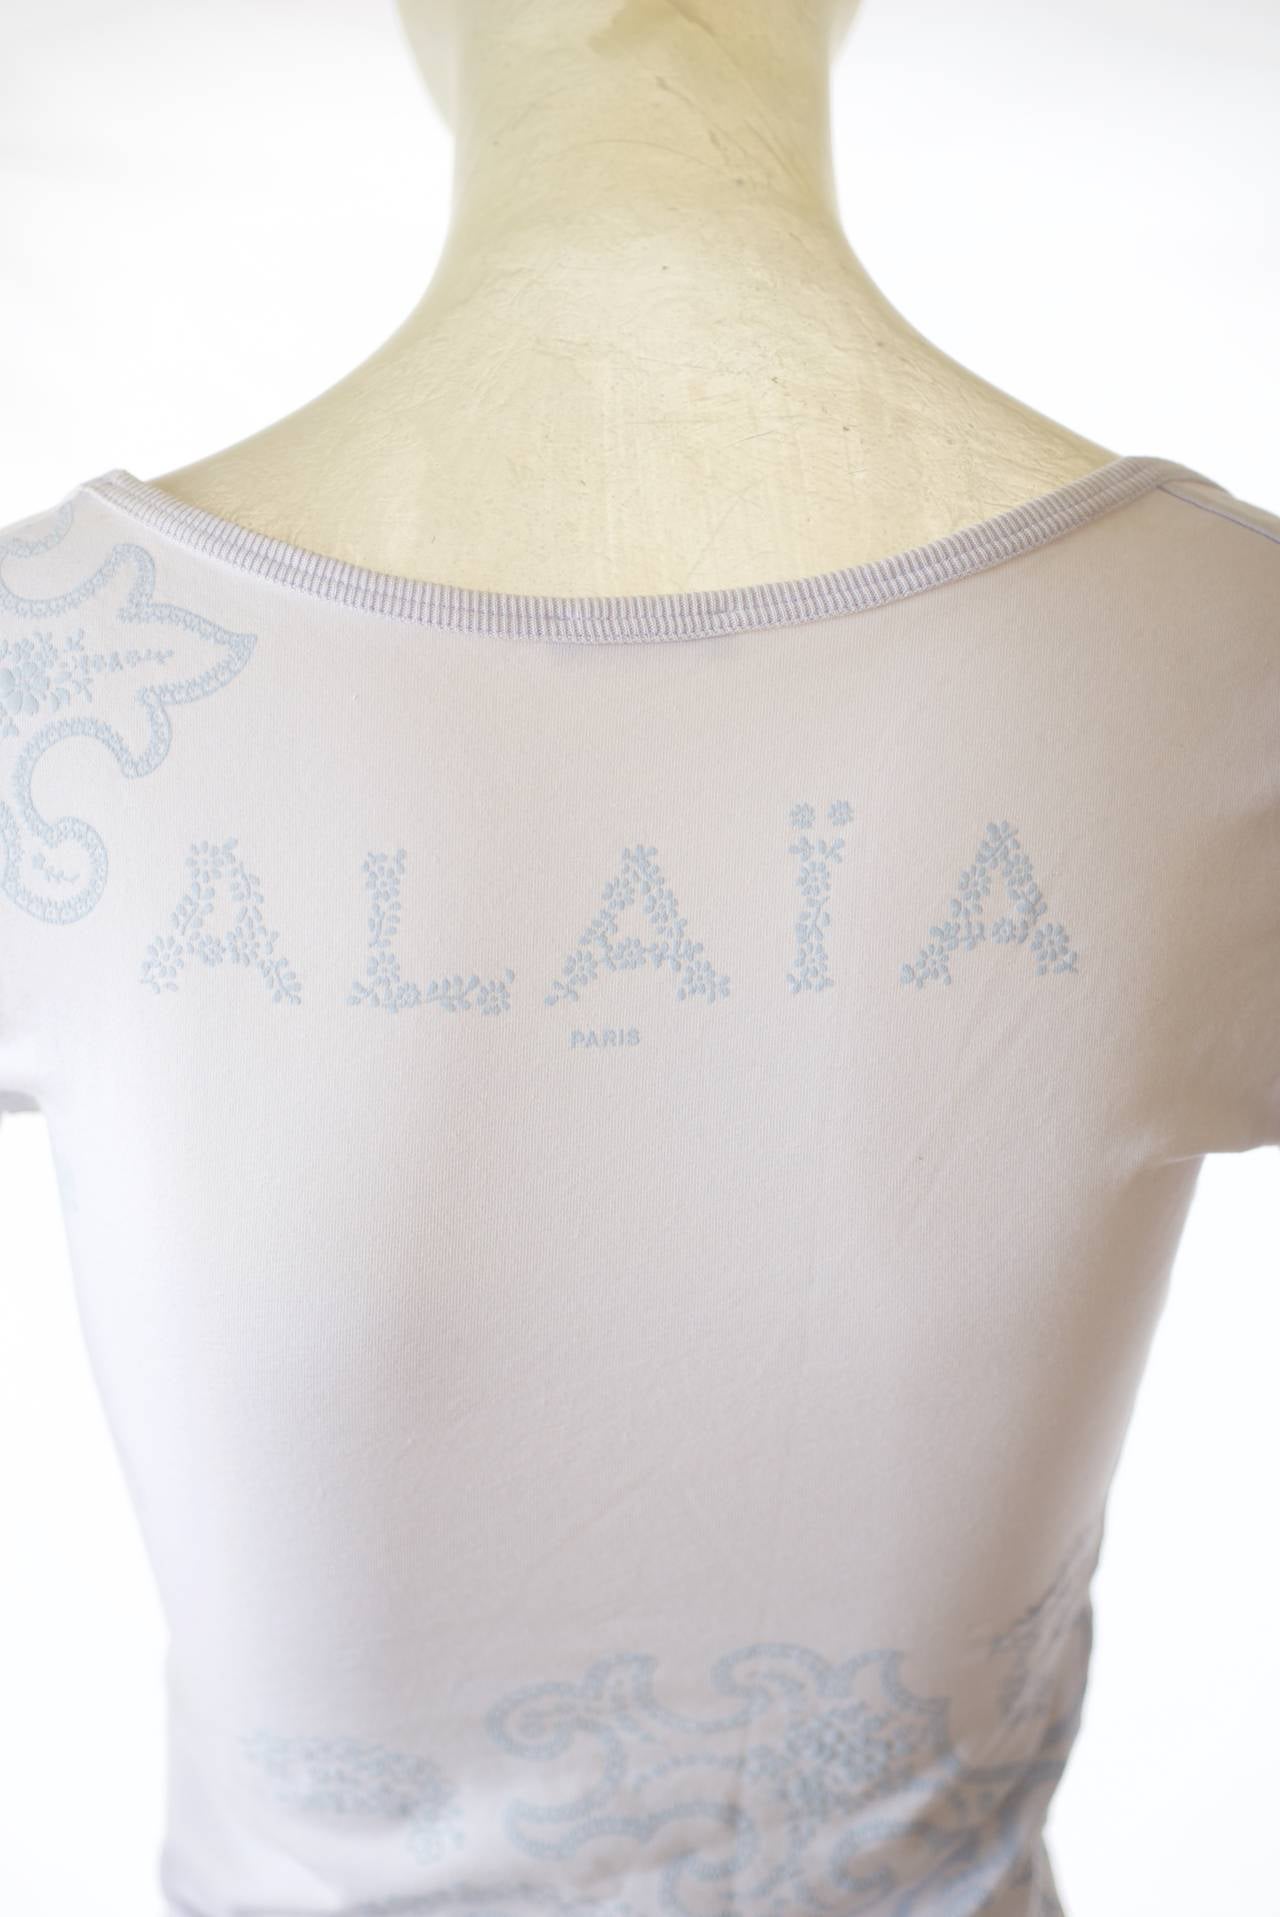 Alaia Stretch Shirt in a Pale Paisley Print In Excellent Condition For Sale In New York, NY